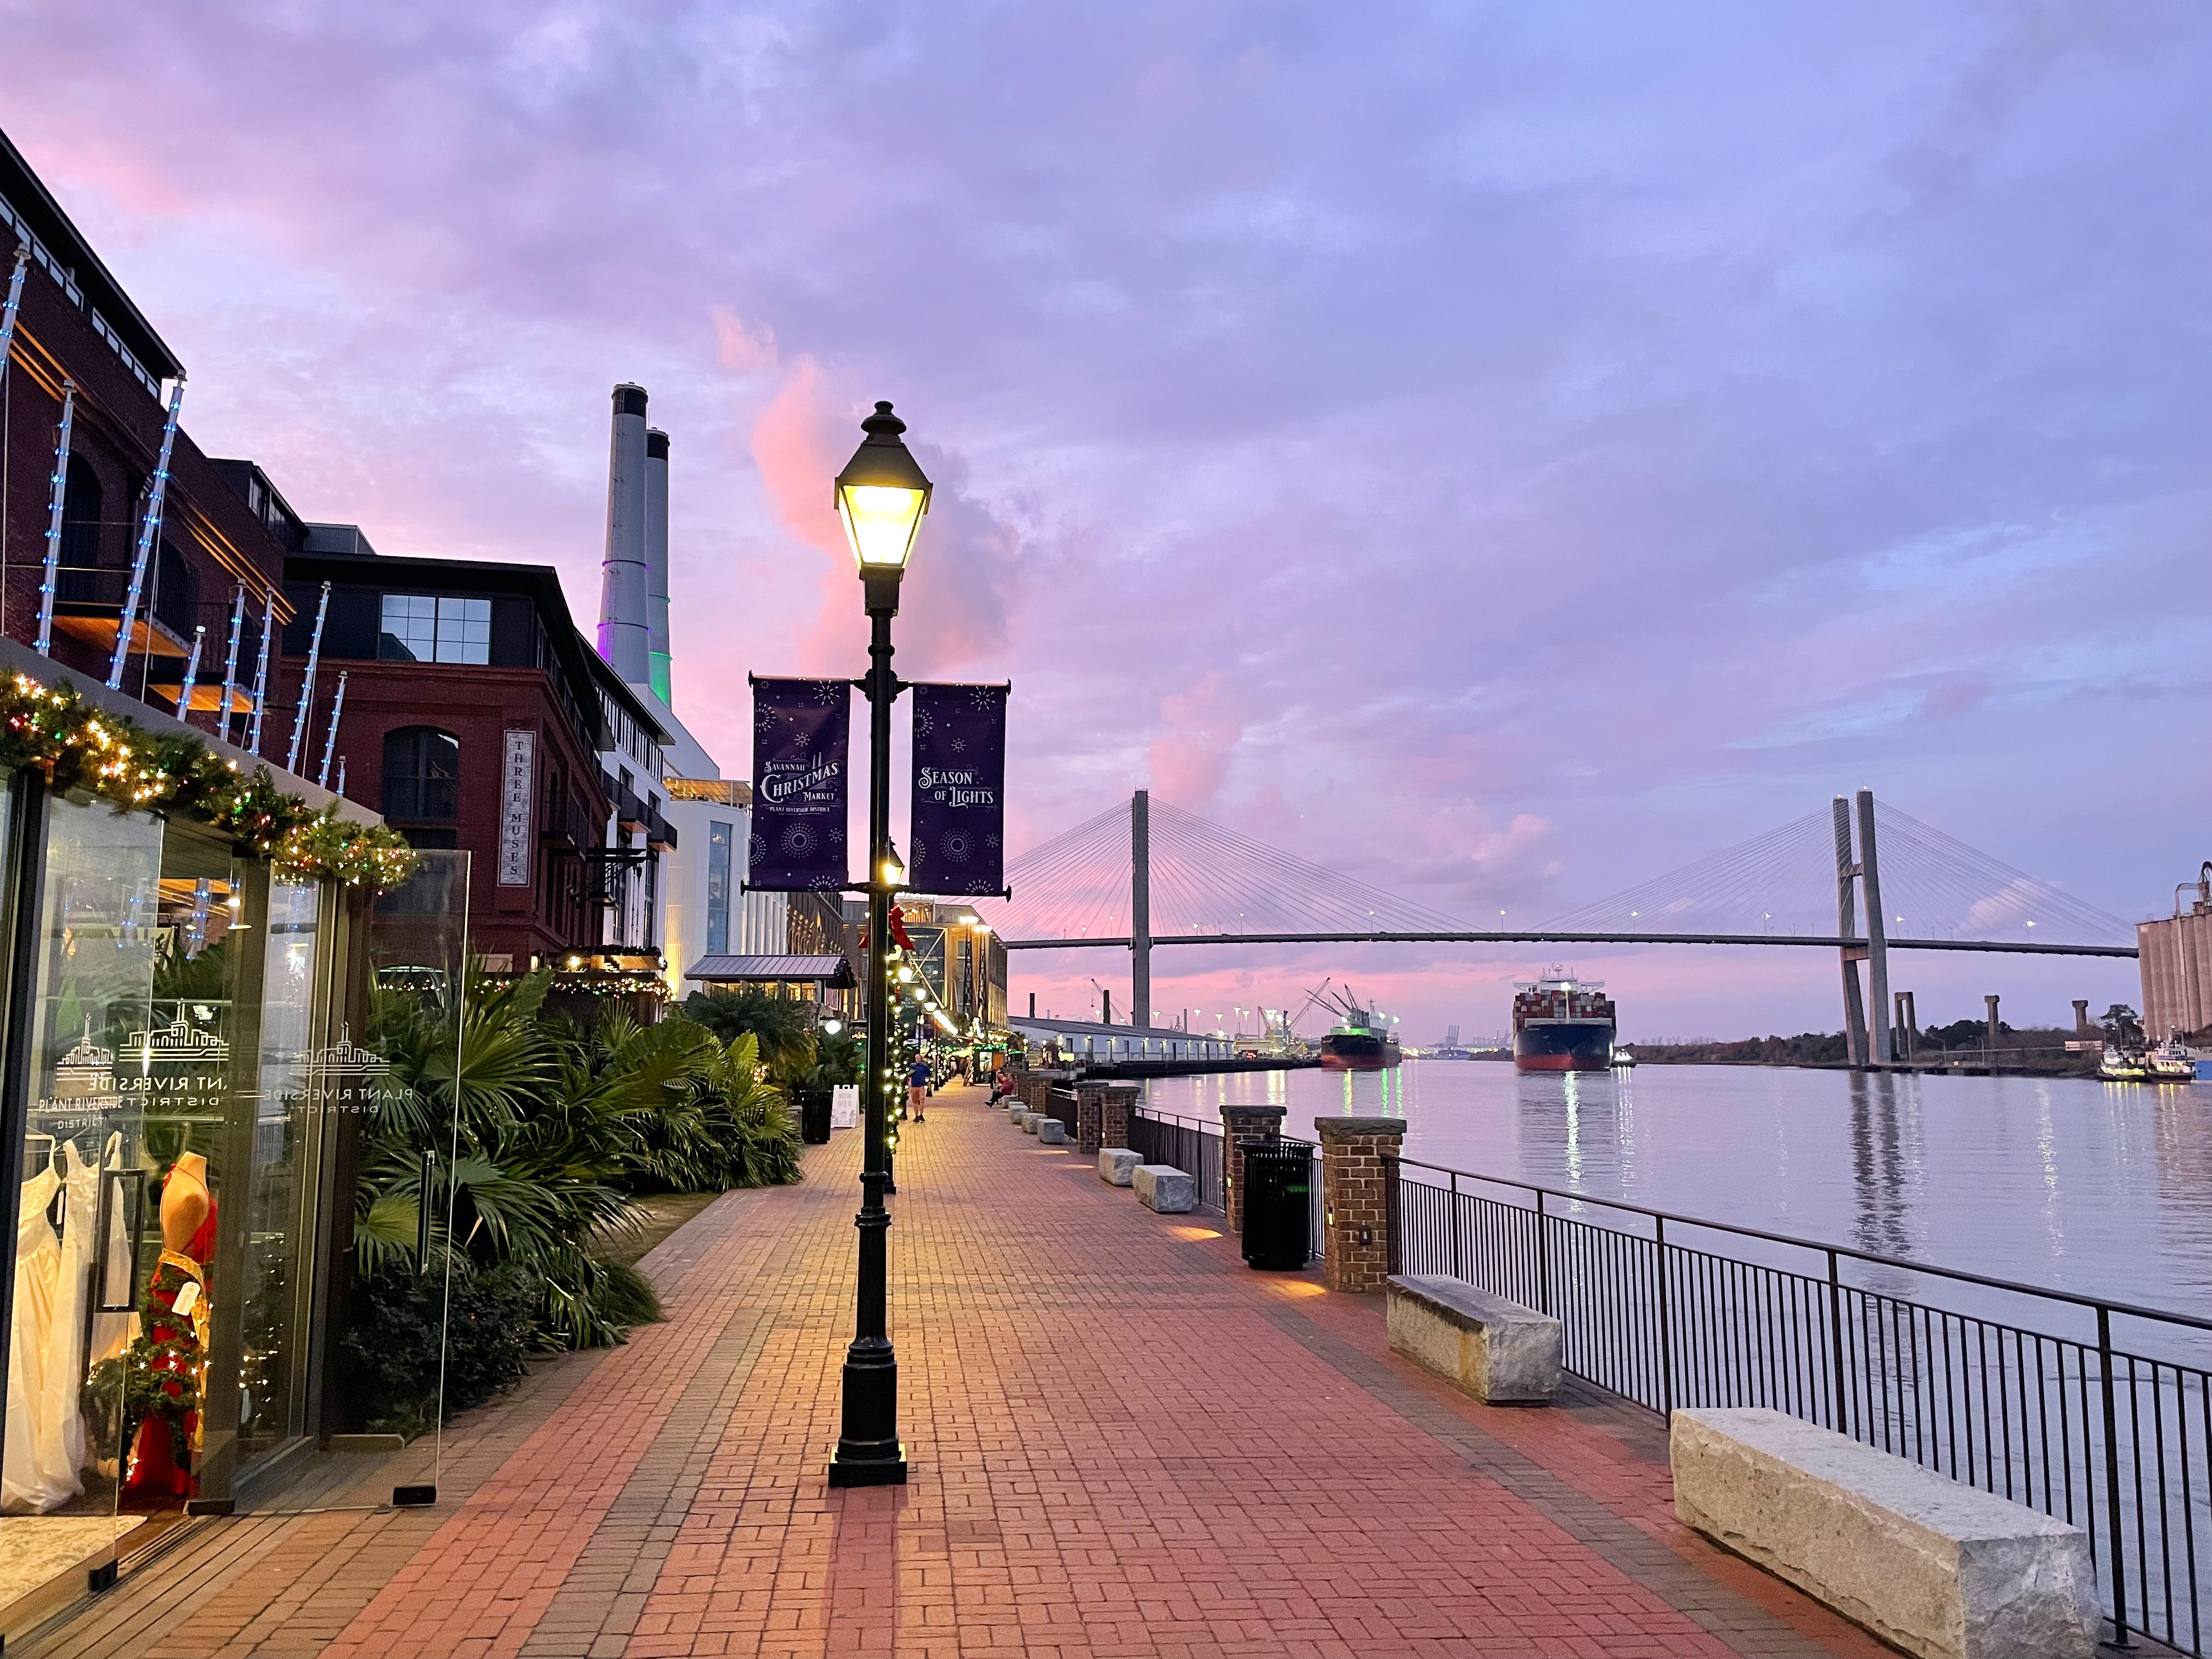 What To Do & Where to Eat in Savannah for Families. Savannah riverfront at night. December in Savannah. Plant Riverside District at night in Savannah.